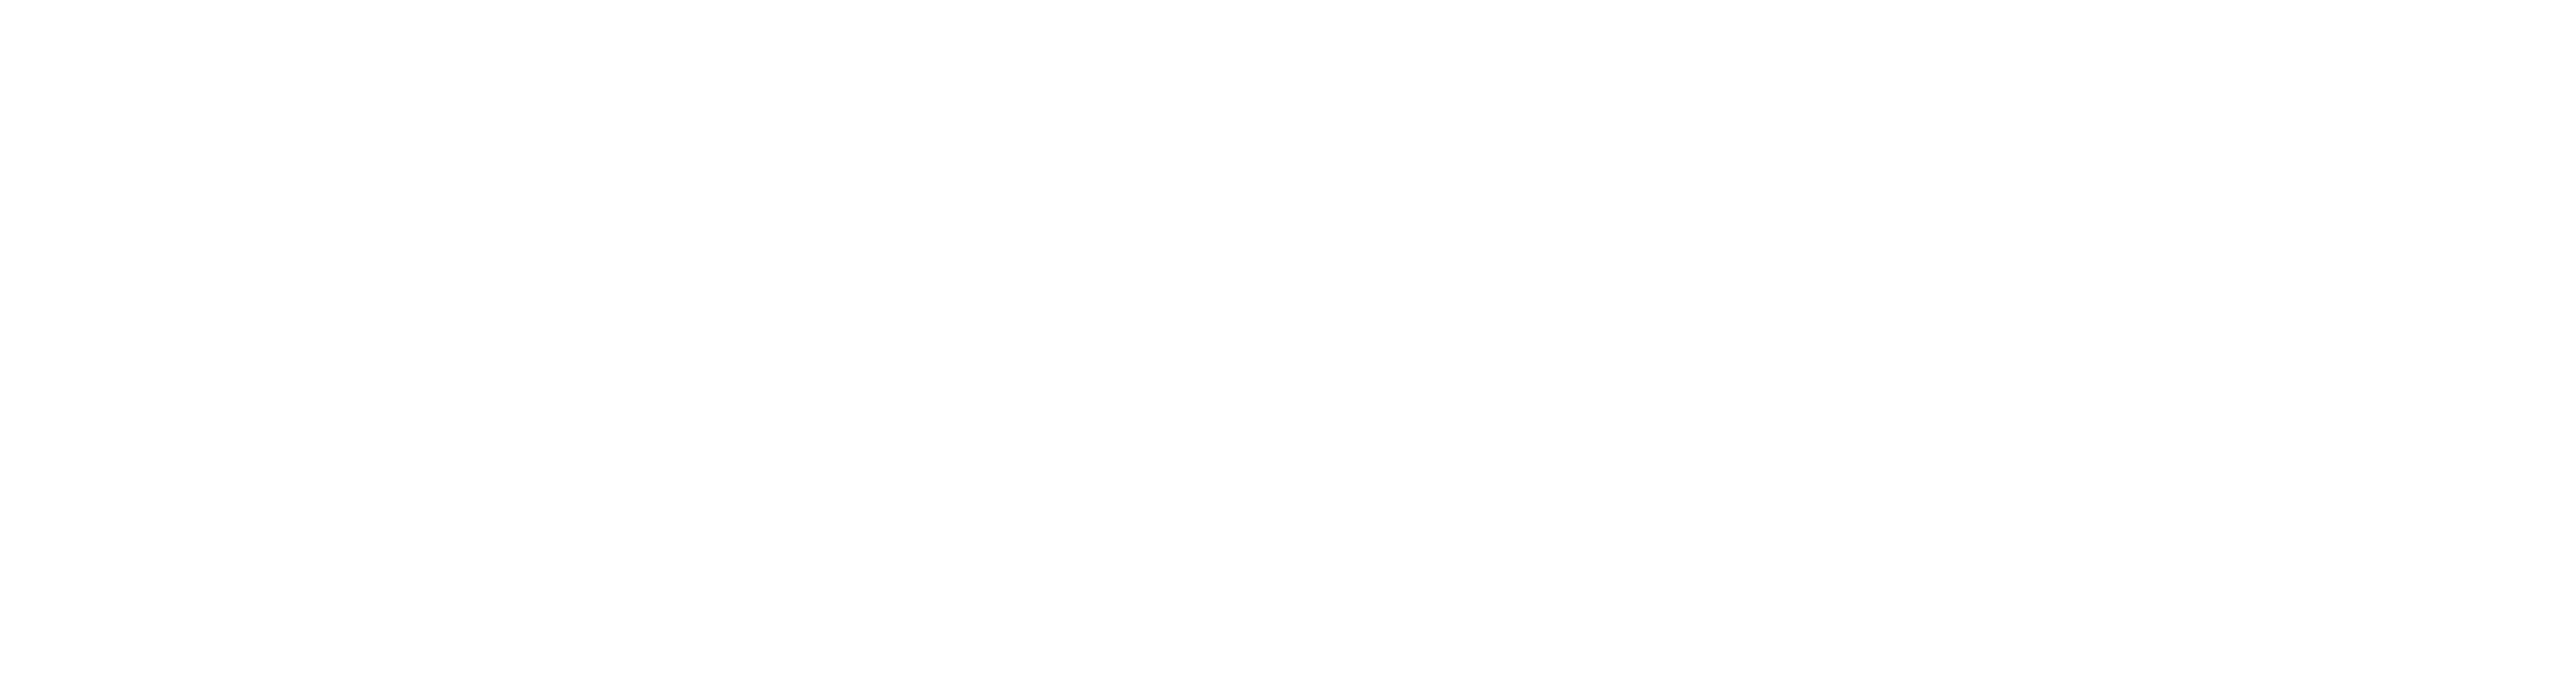 Clever Medical Research LLC